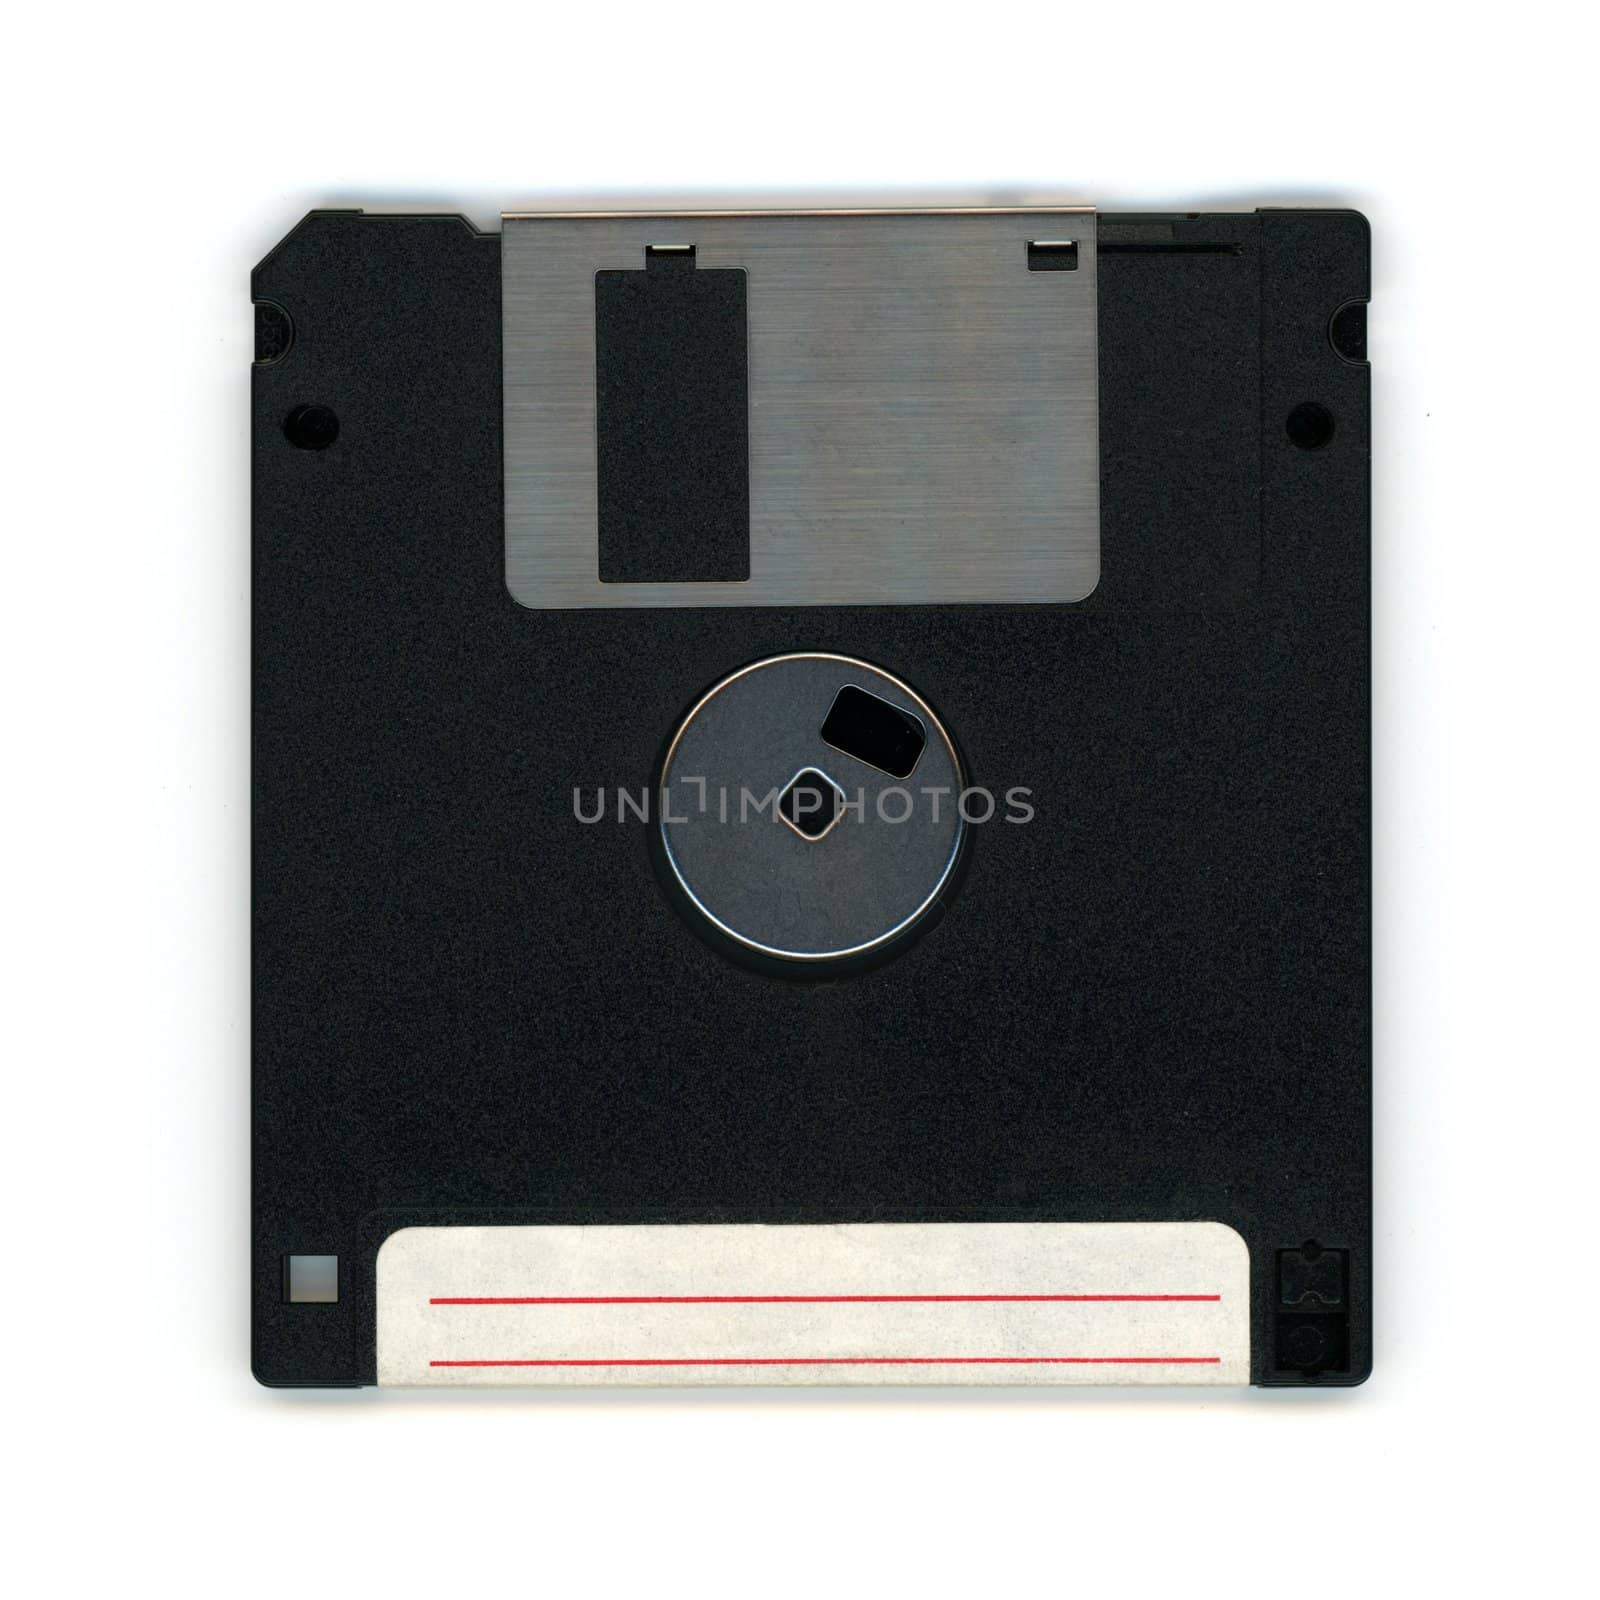 back side of magnetic floppy disk for personal computer data storage